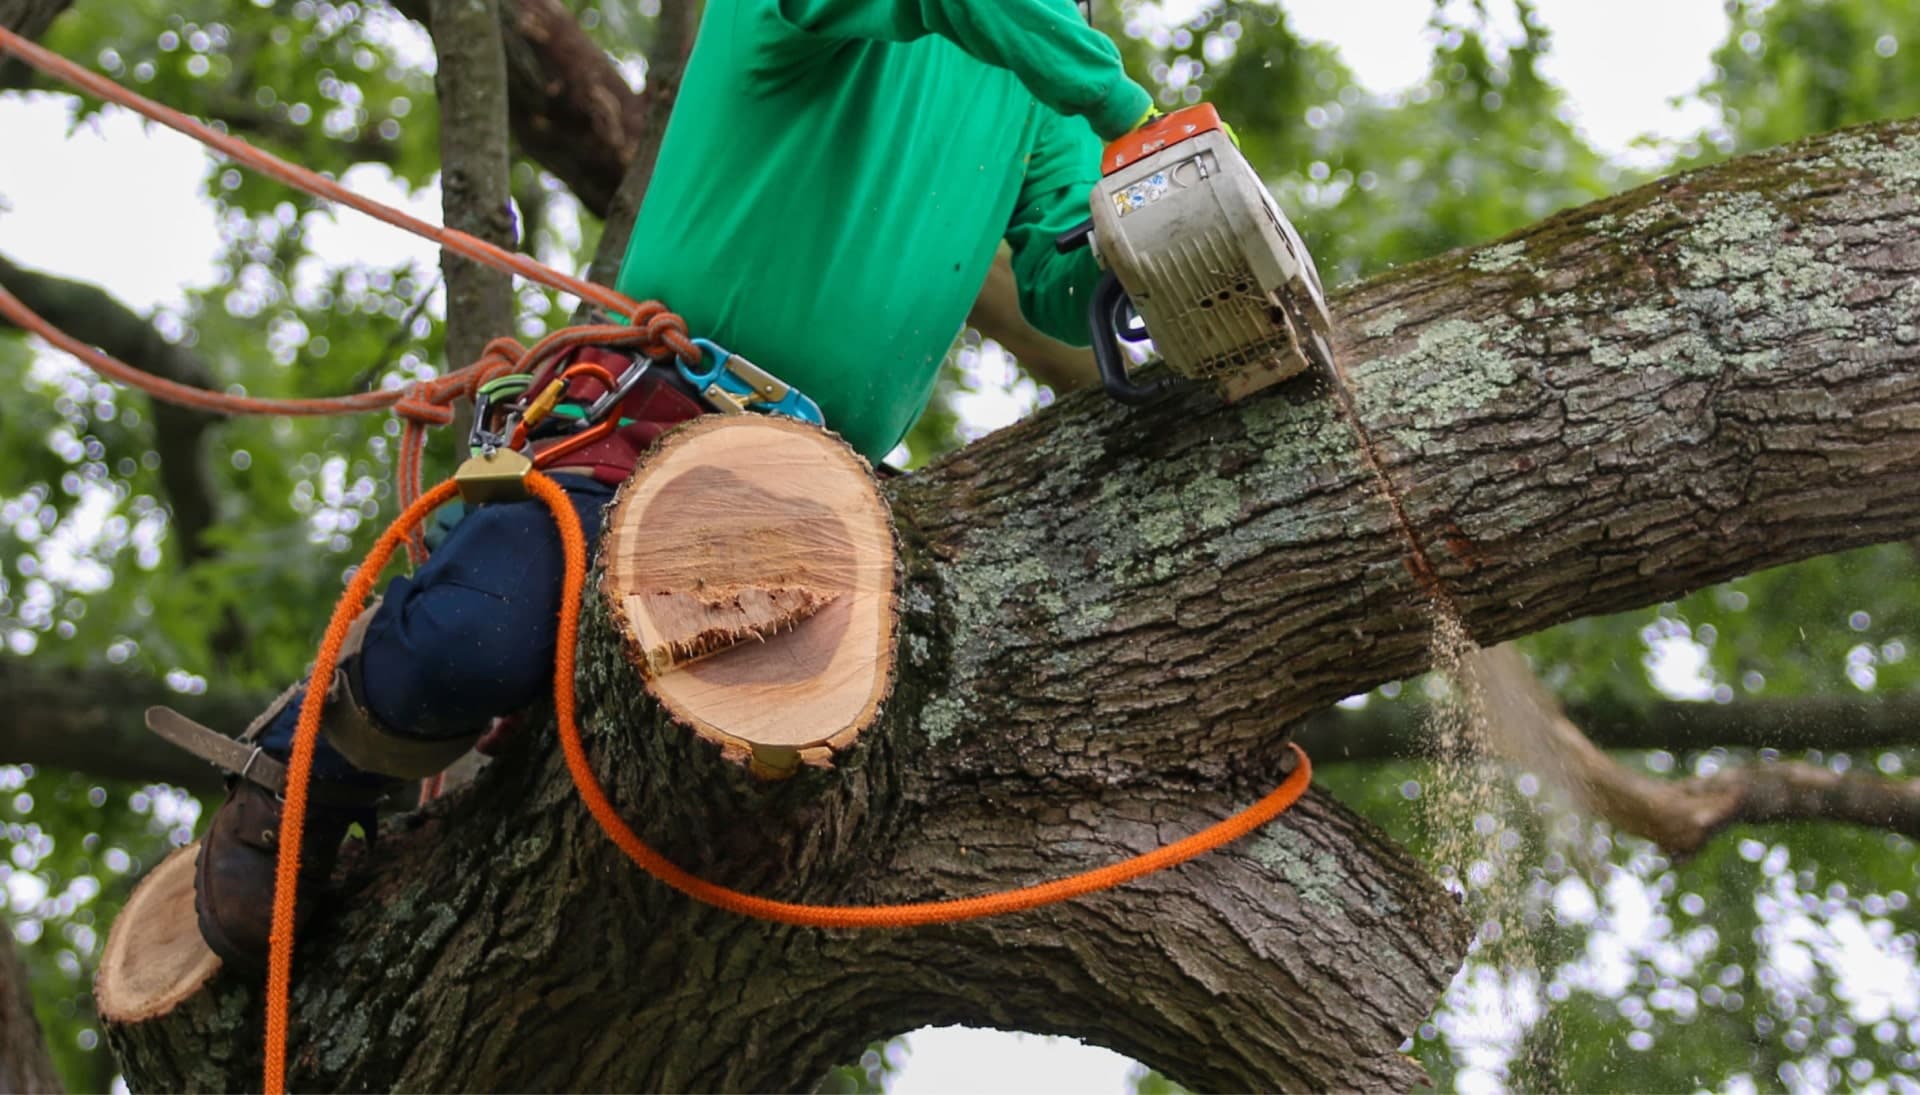 Shed your worries away with best tree removal in Pittsburgh